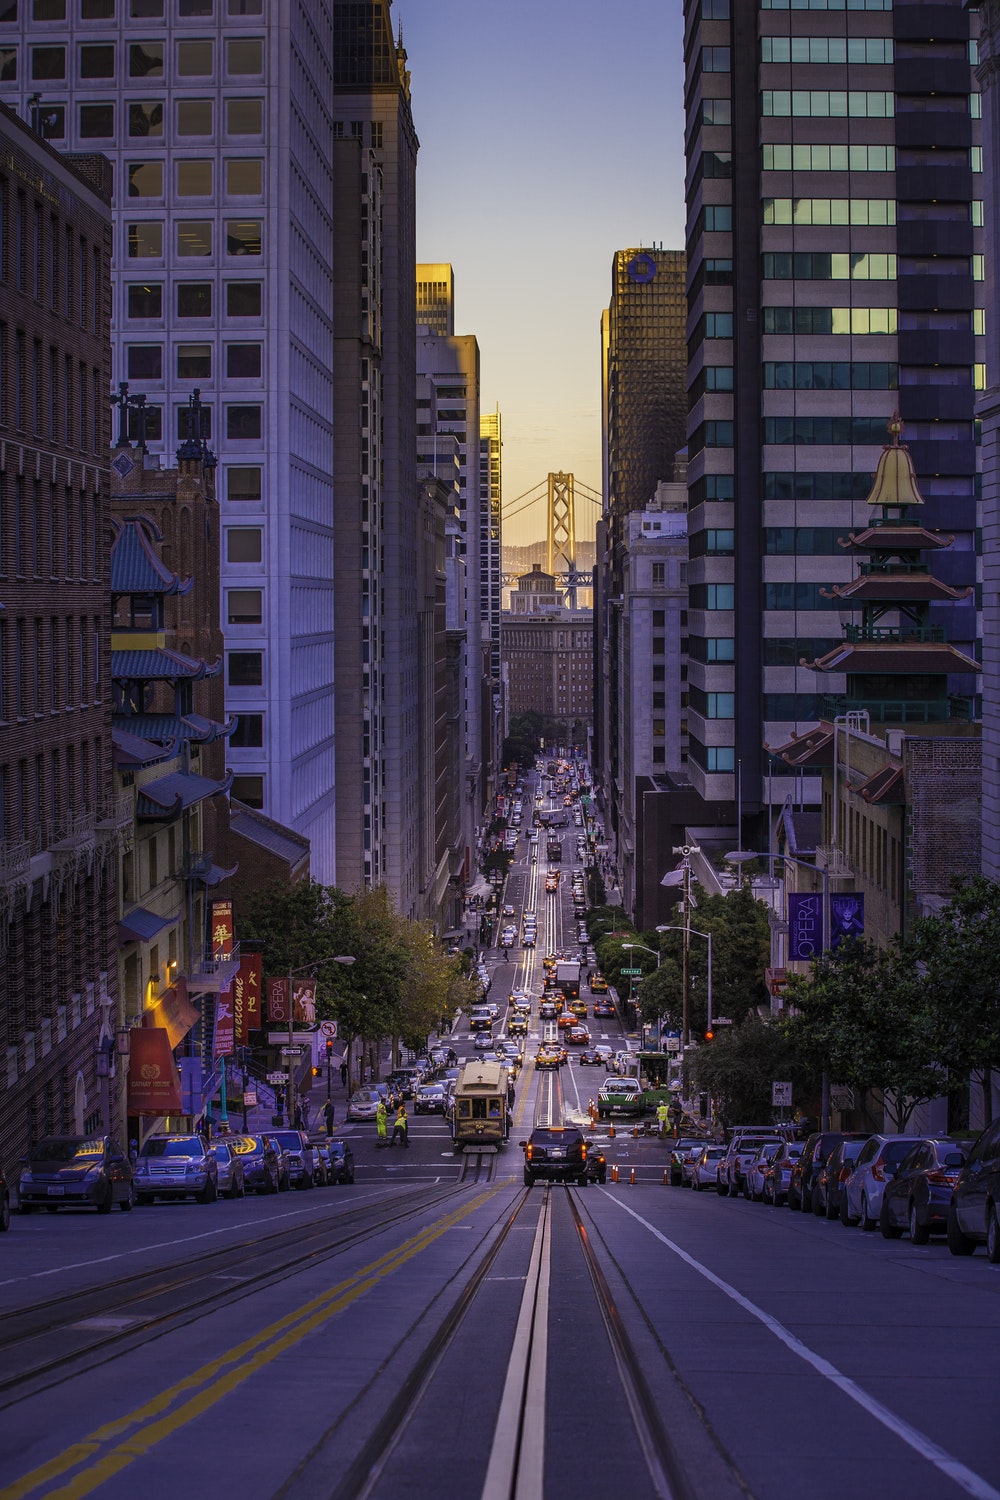 San Francisco Pictures Stunning Image On